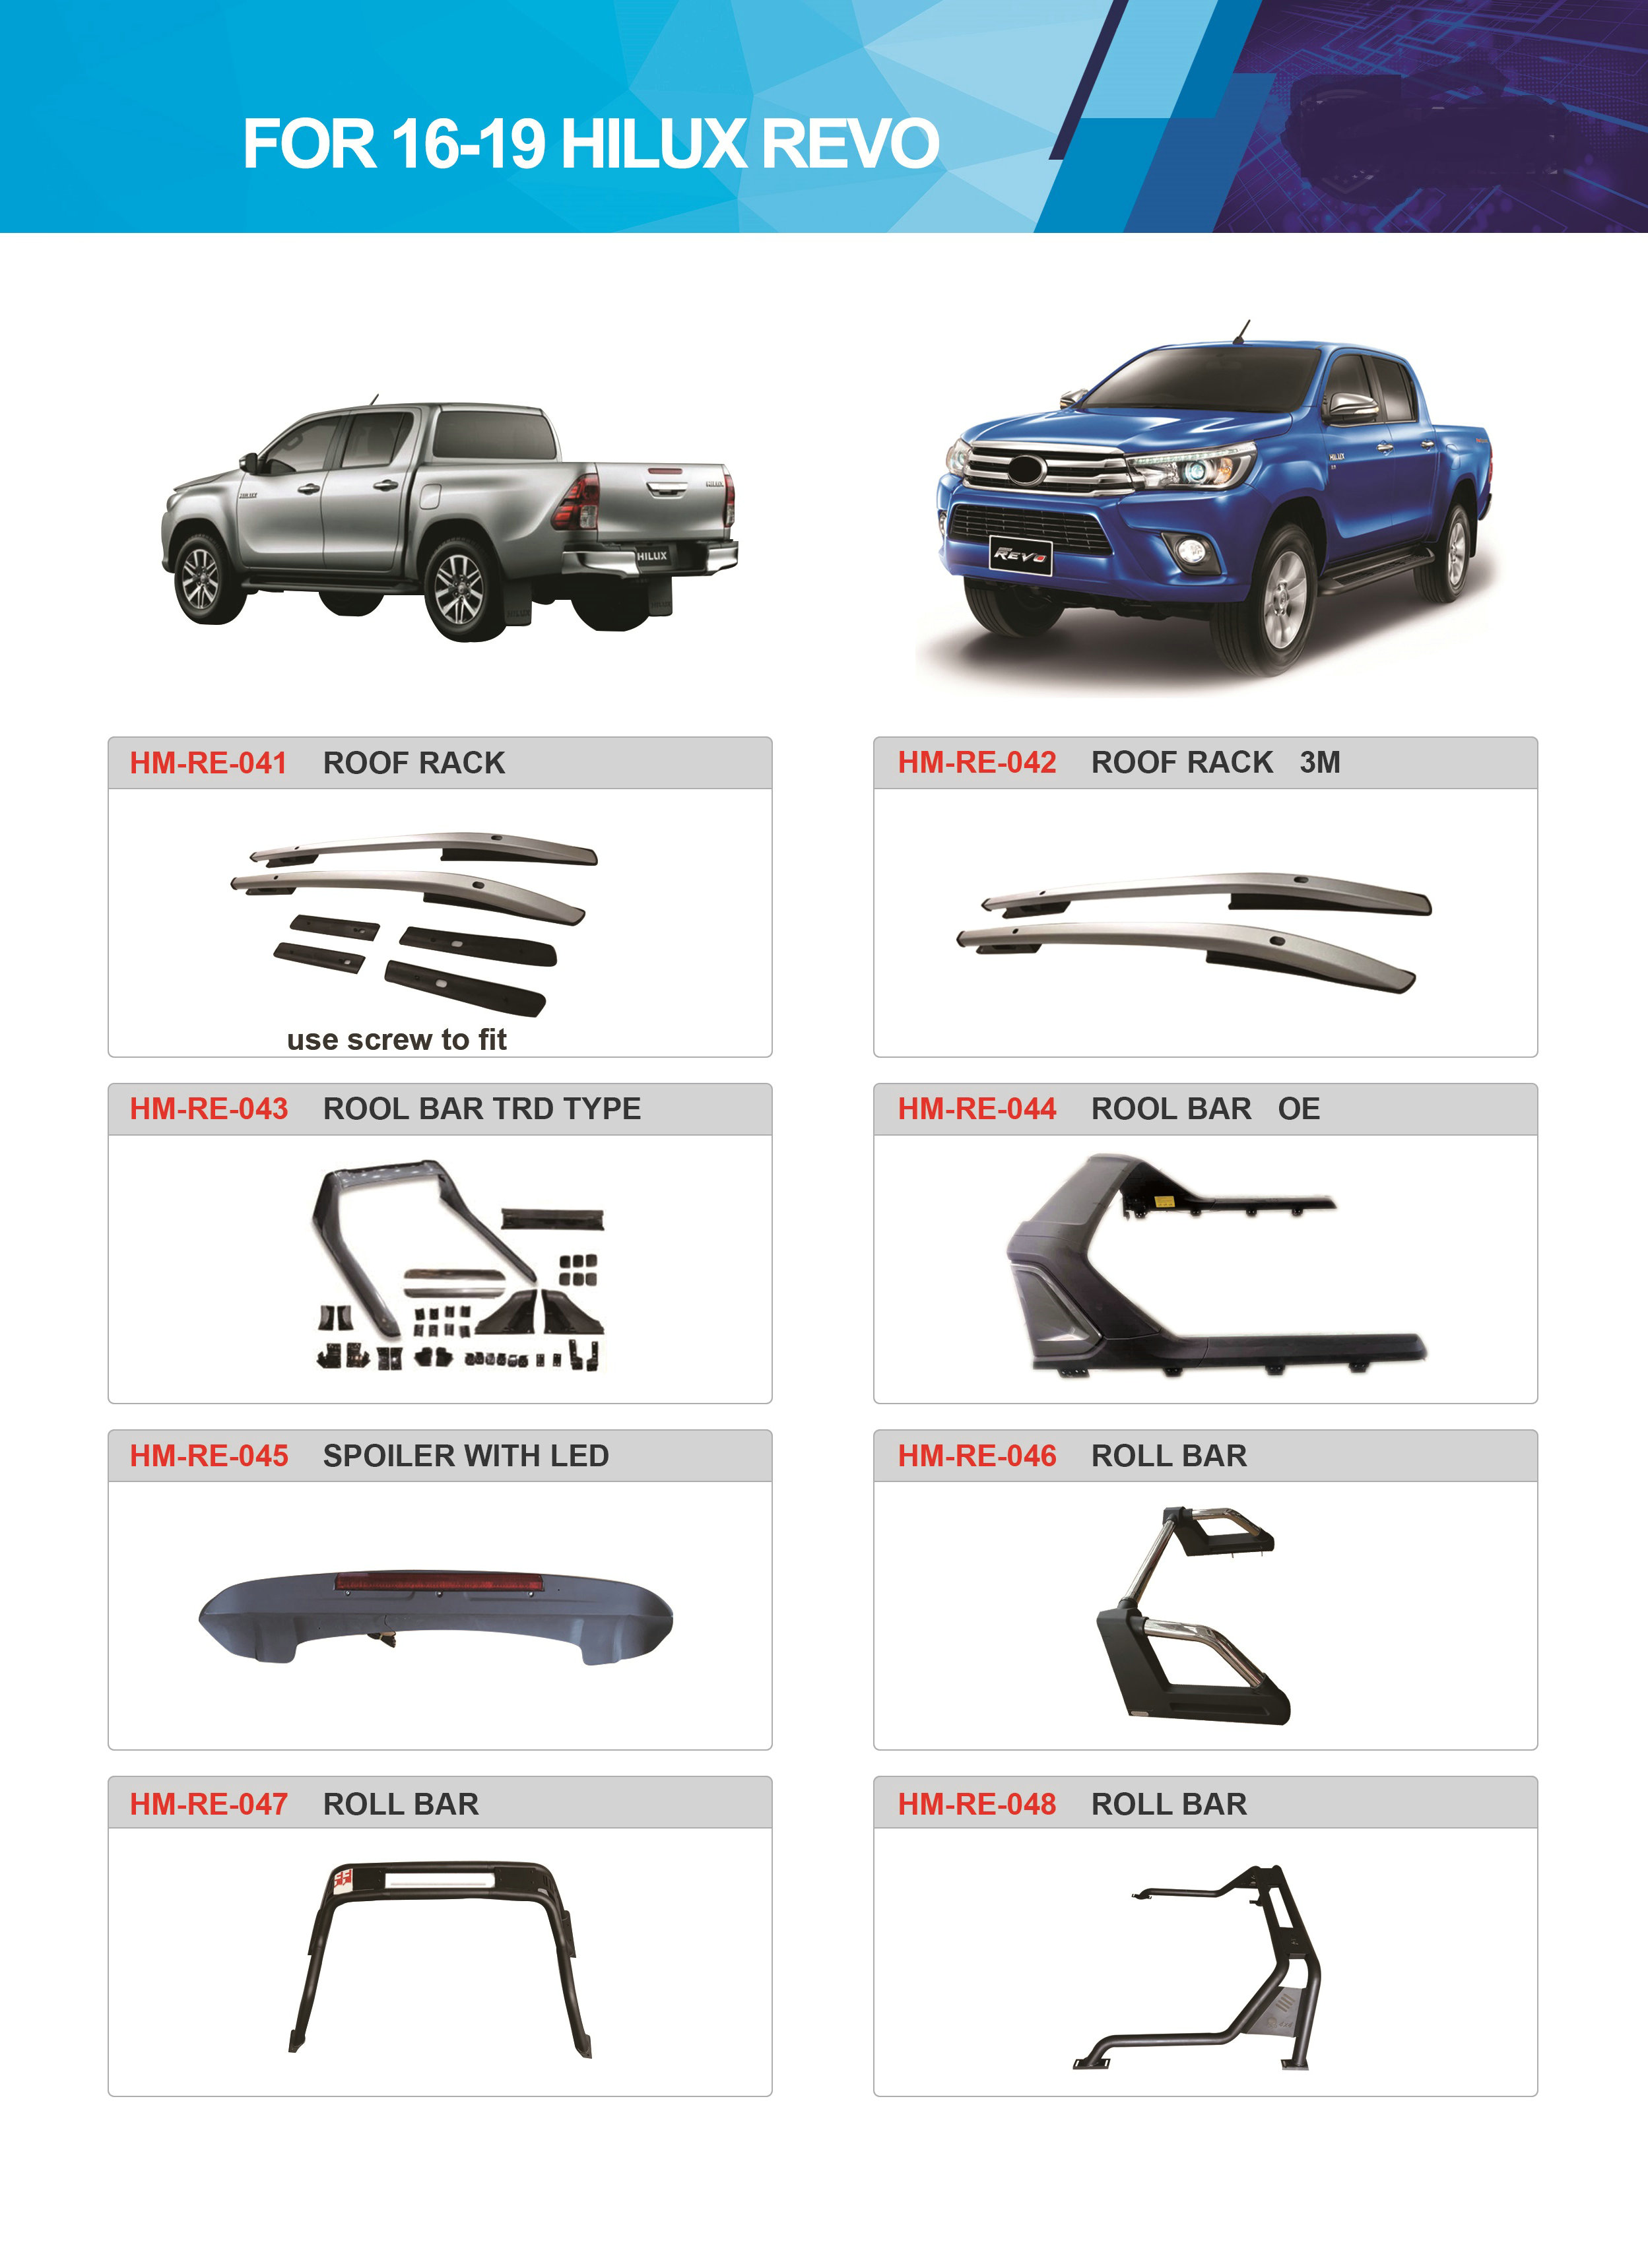 For 16-19 Hilux Revo Featured Image